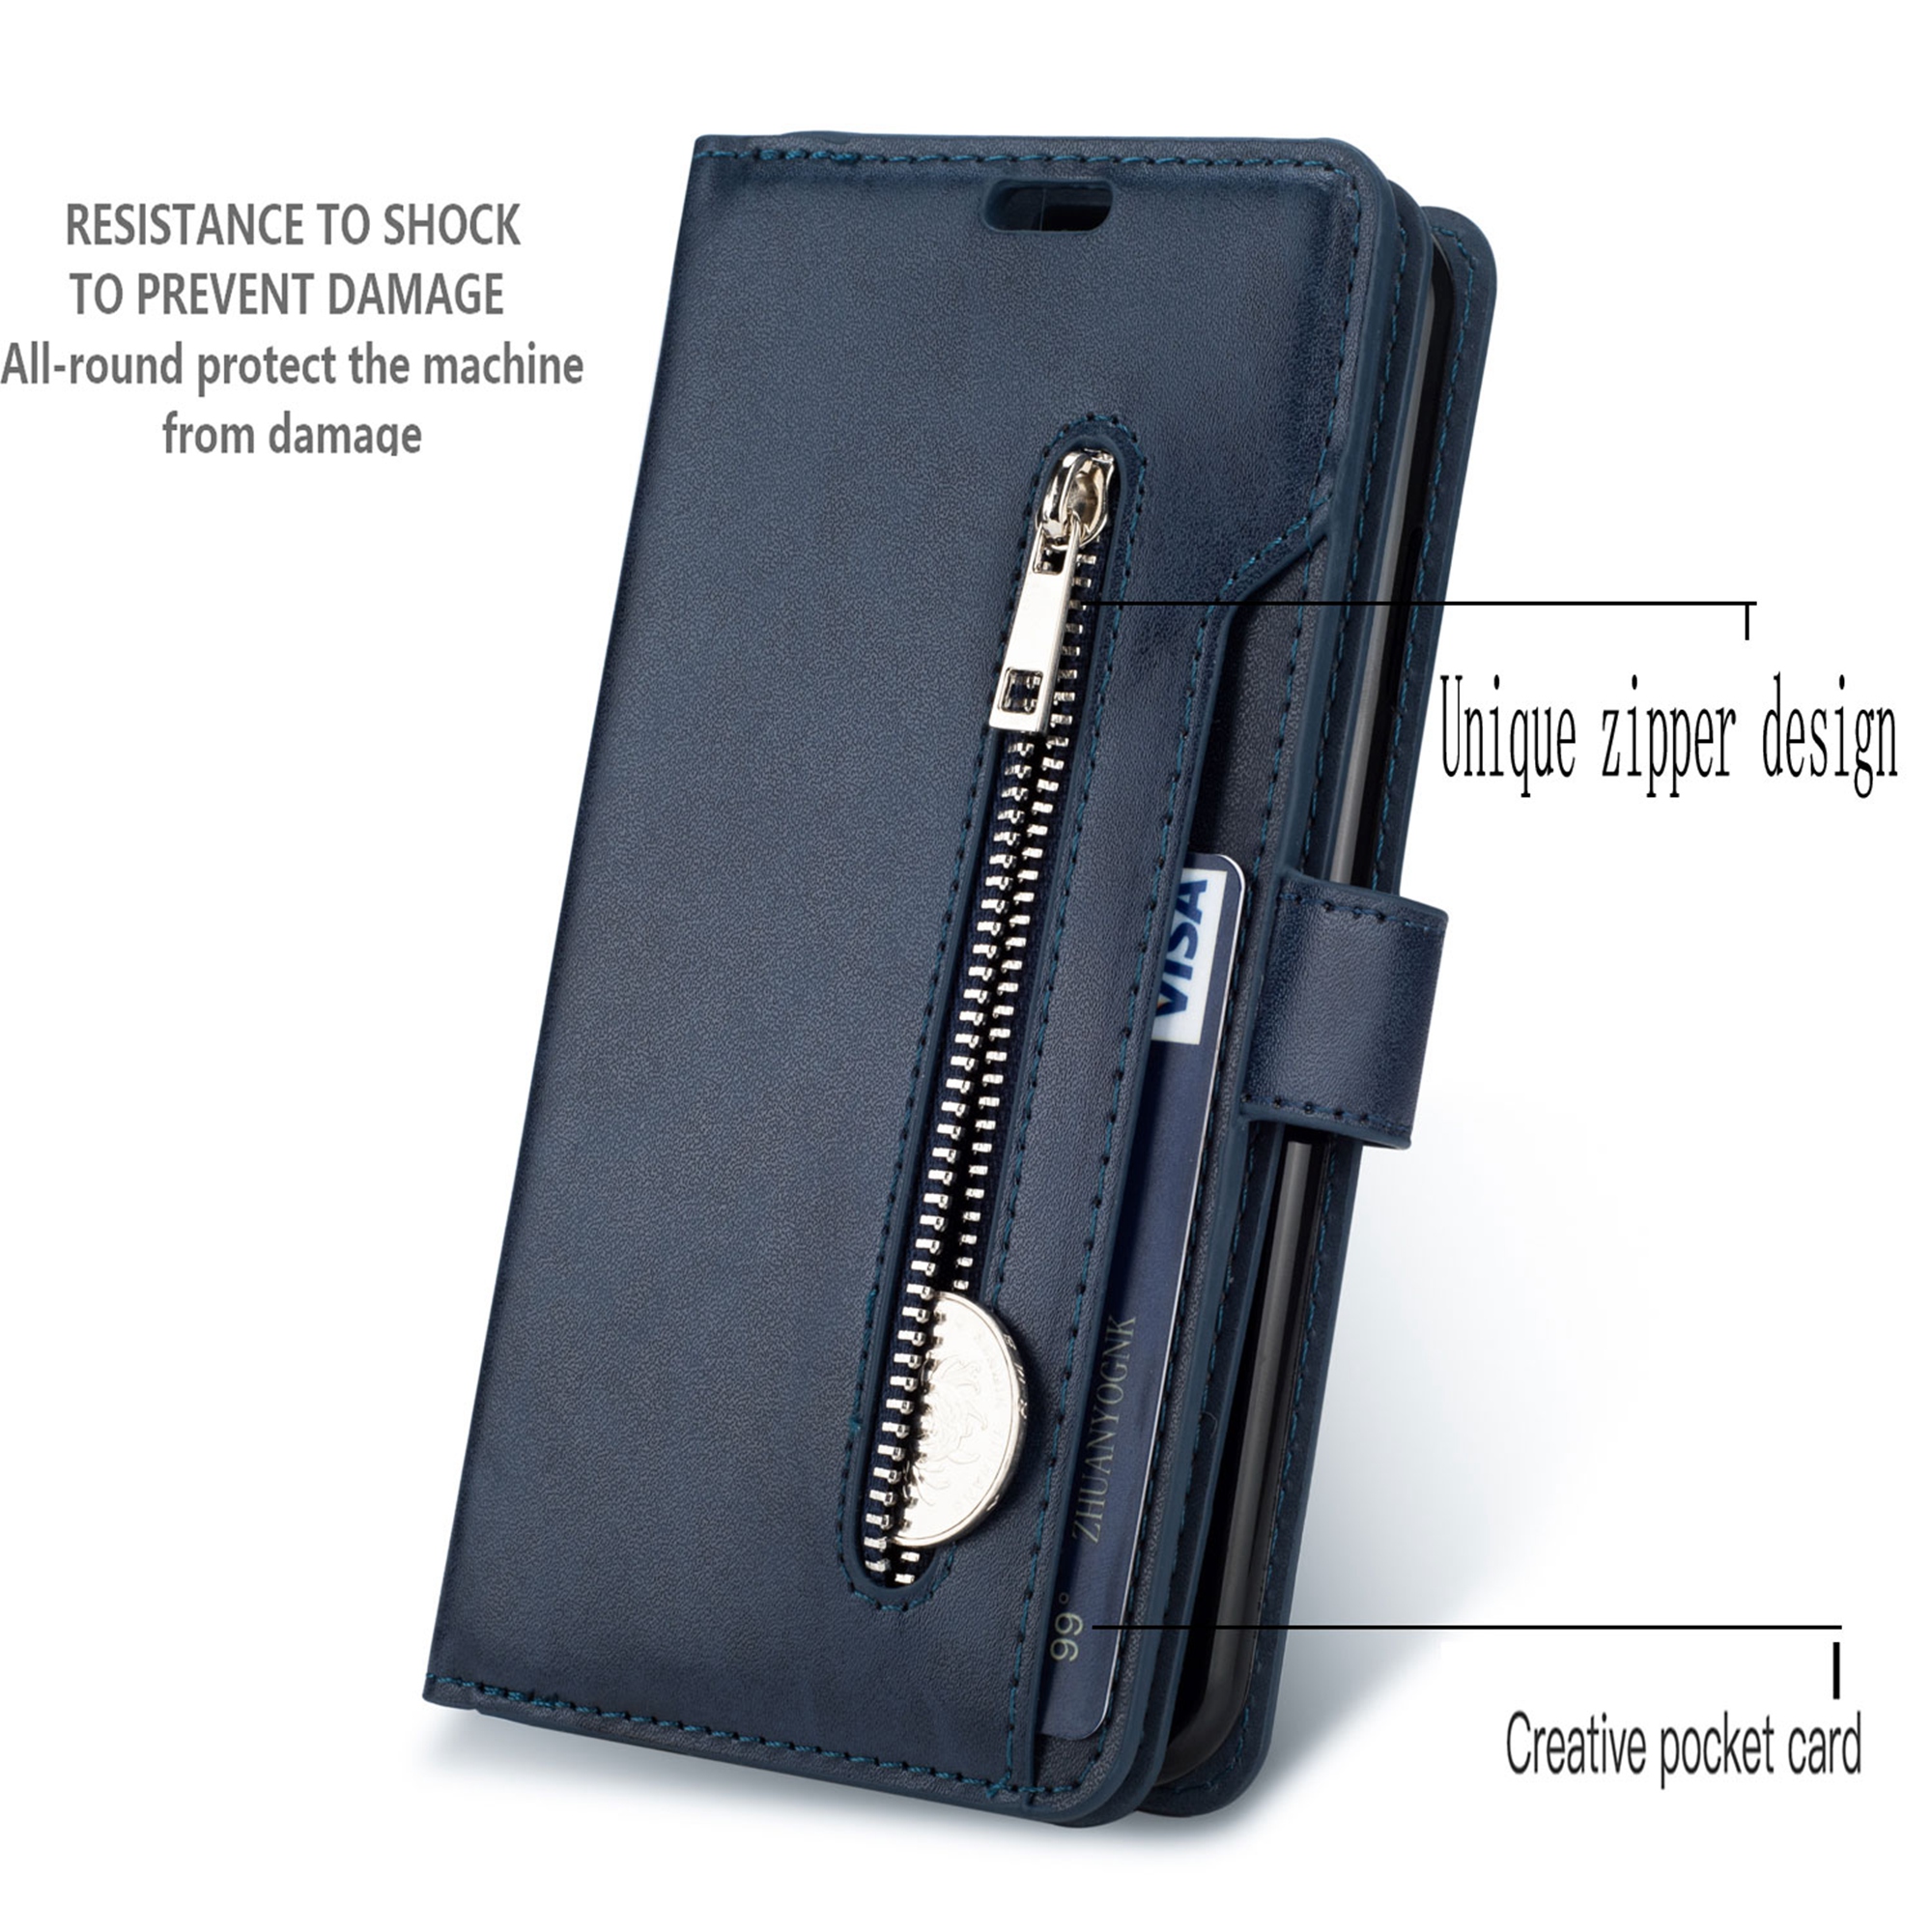 iPhone 11 Pro Max 6.5 inch Wallet Case, Dteck 9 Card Slots Premium Leather Zipper Purse case Flip Kickstand Folio Magnetic with Wrist Strap Credit Cash Cover For Apple iPhone 11 Pro Max, Blue - image 2 of 7